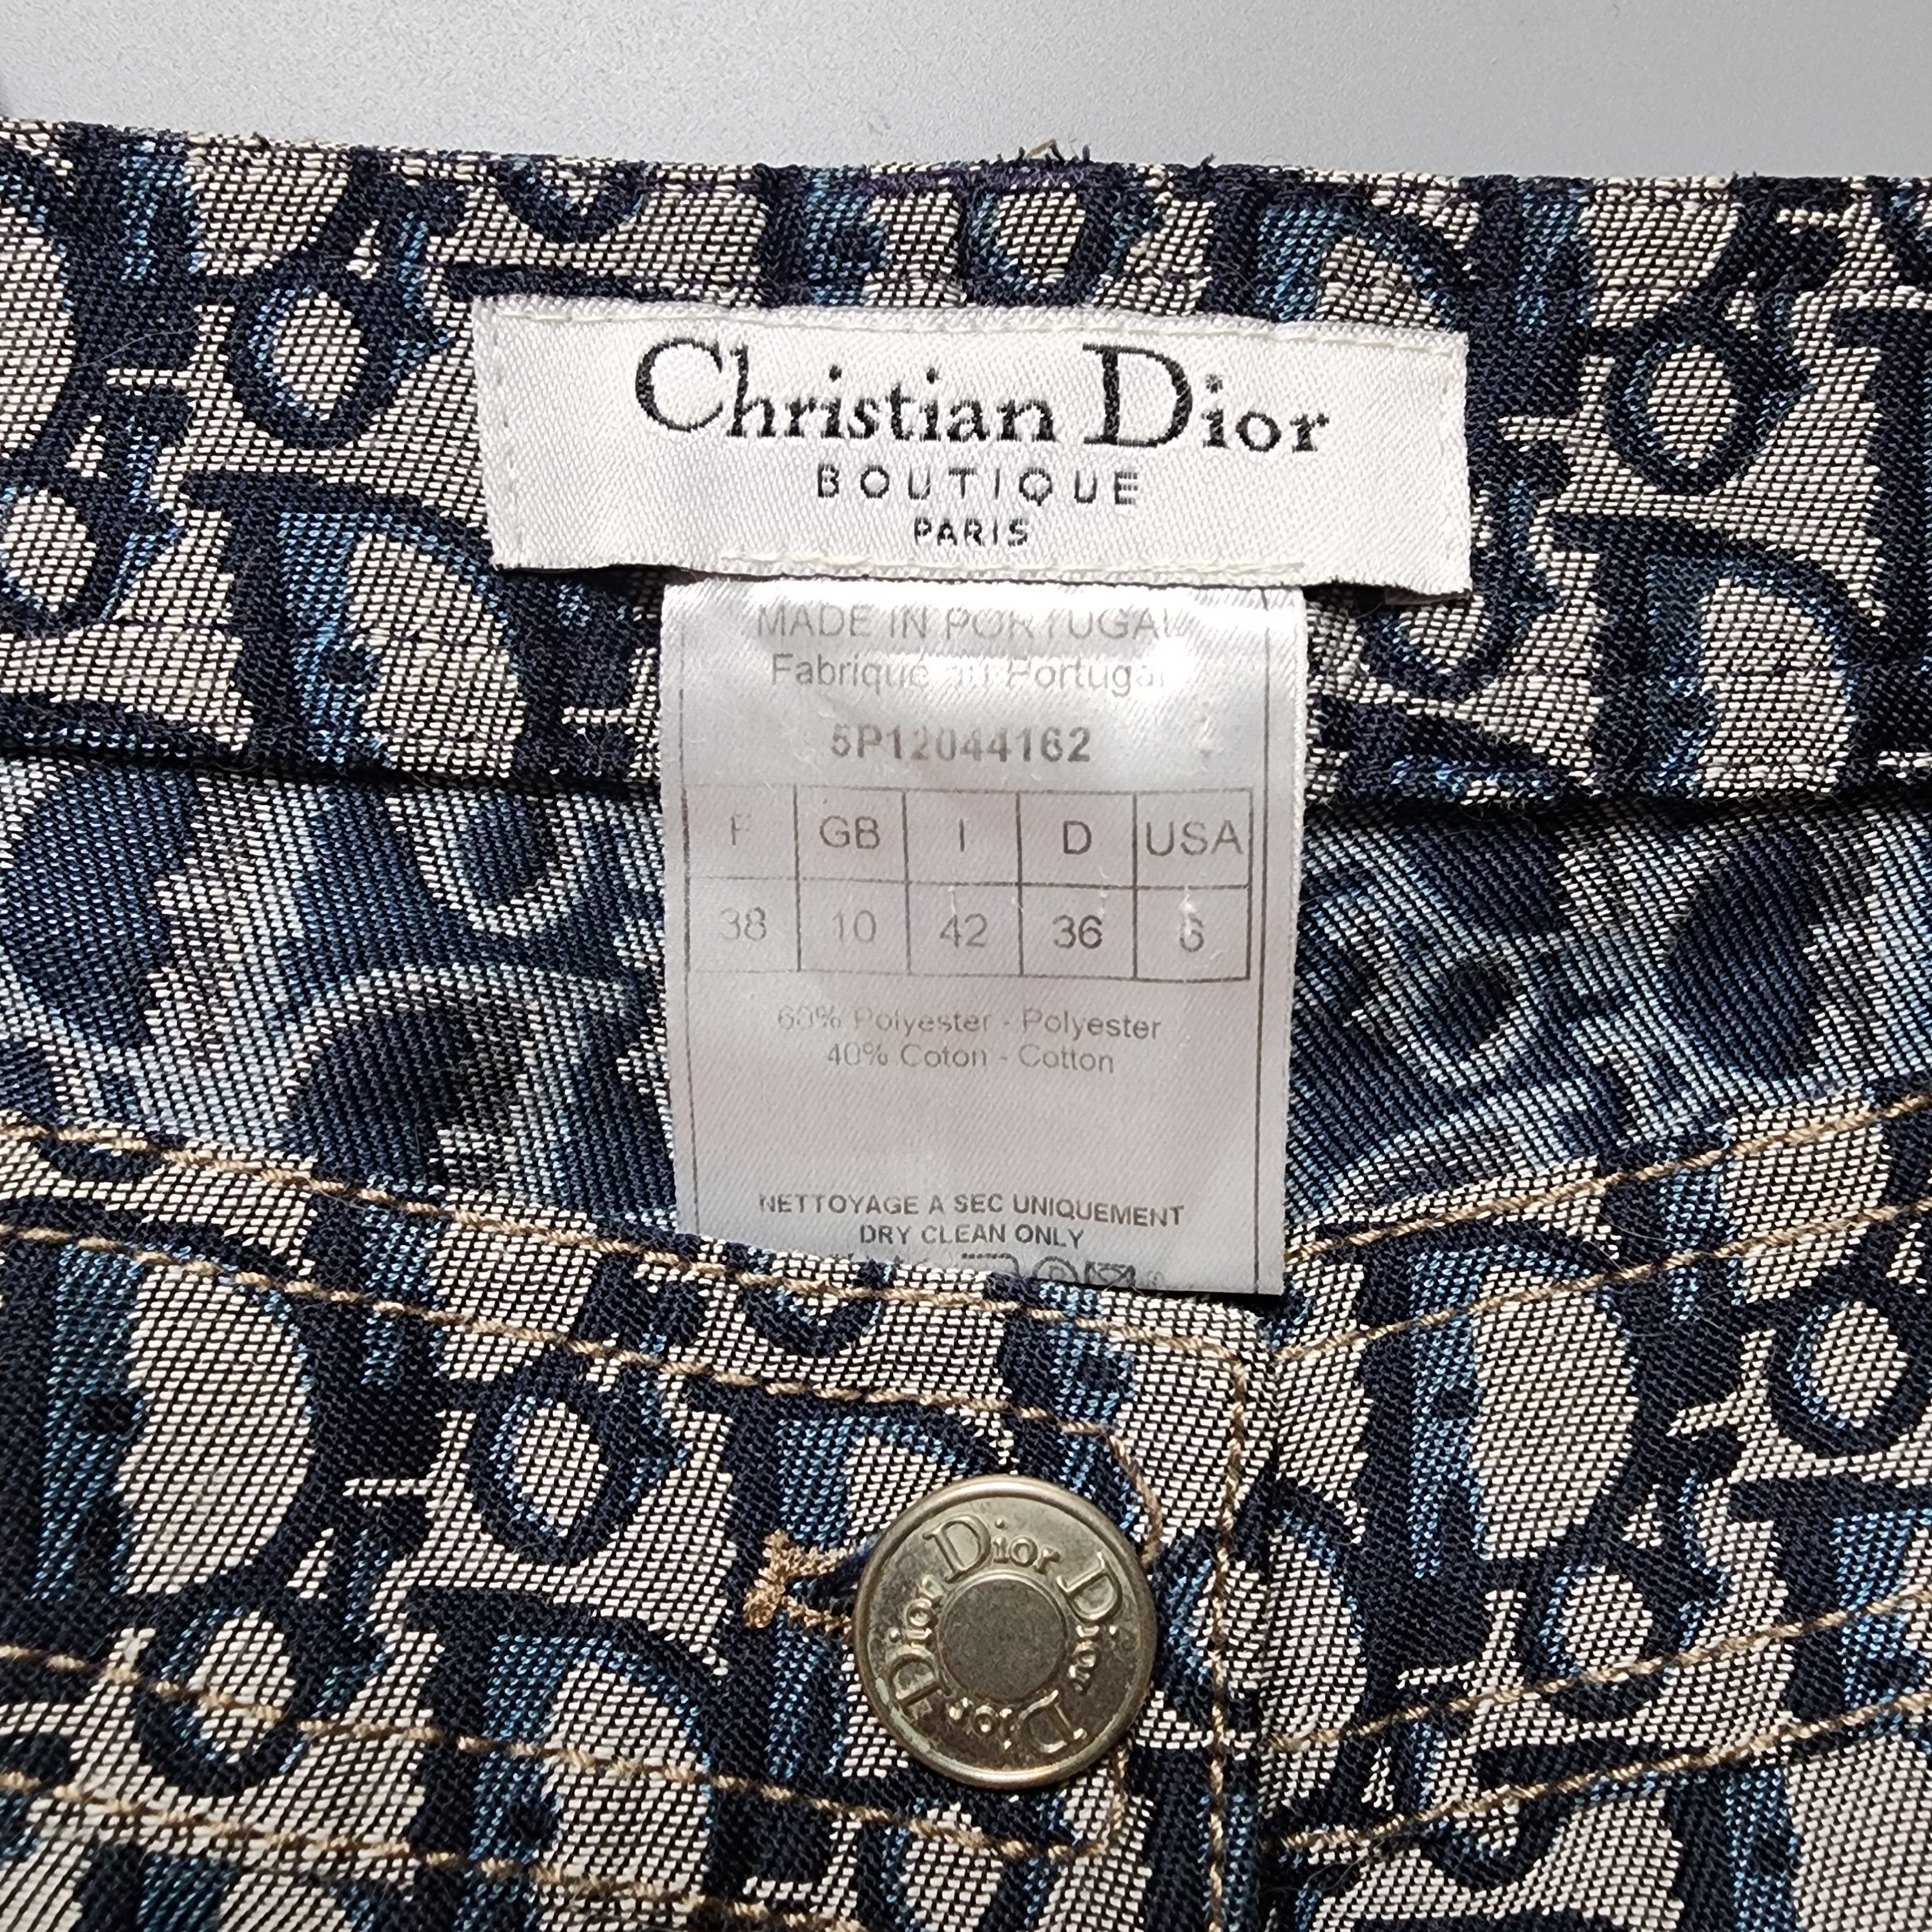 Christian Dior Boutique - AW05 Dior Trotter Pants - 7